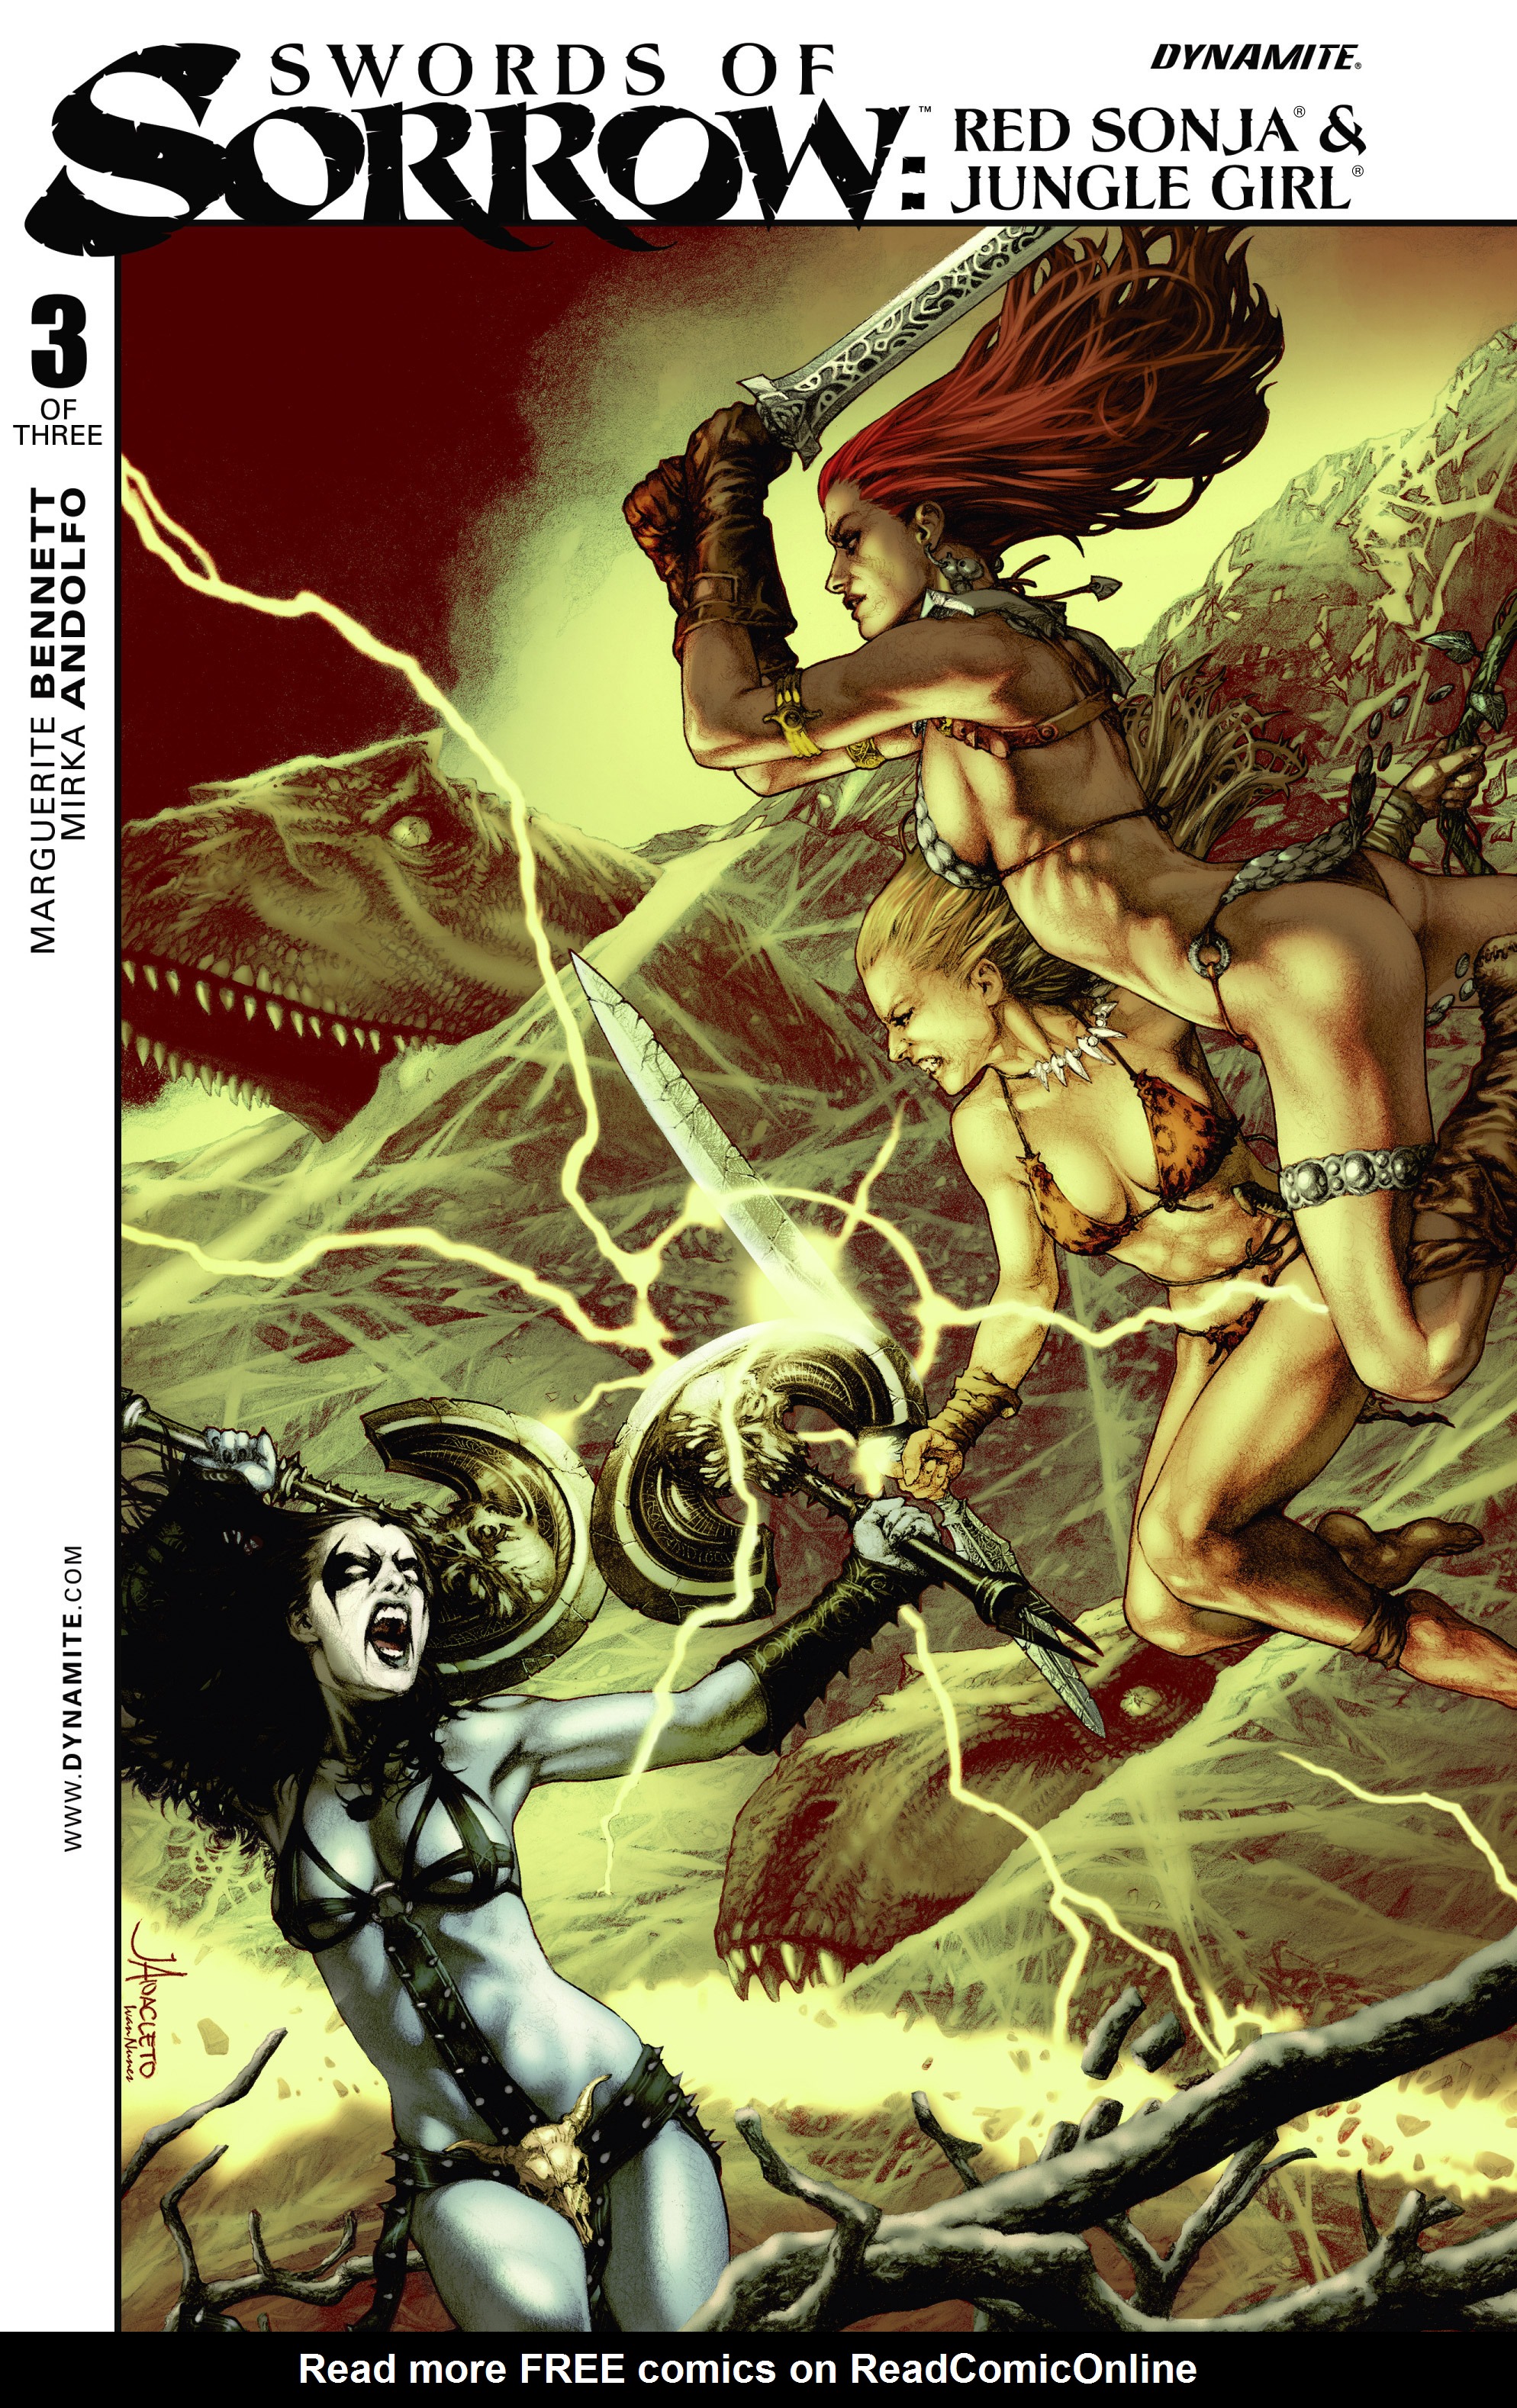 Read online Swords of Sorrow: Red Sonja & Jungle Girl comic -  Issue #3 - 1